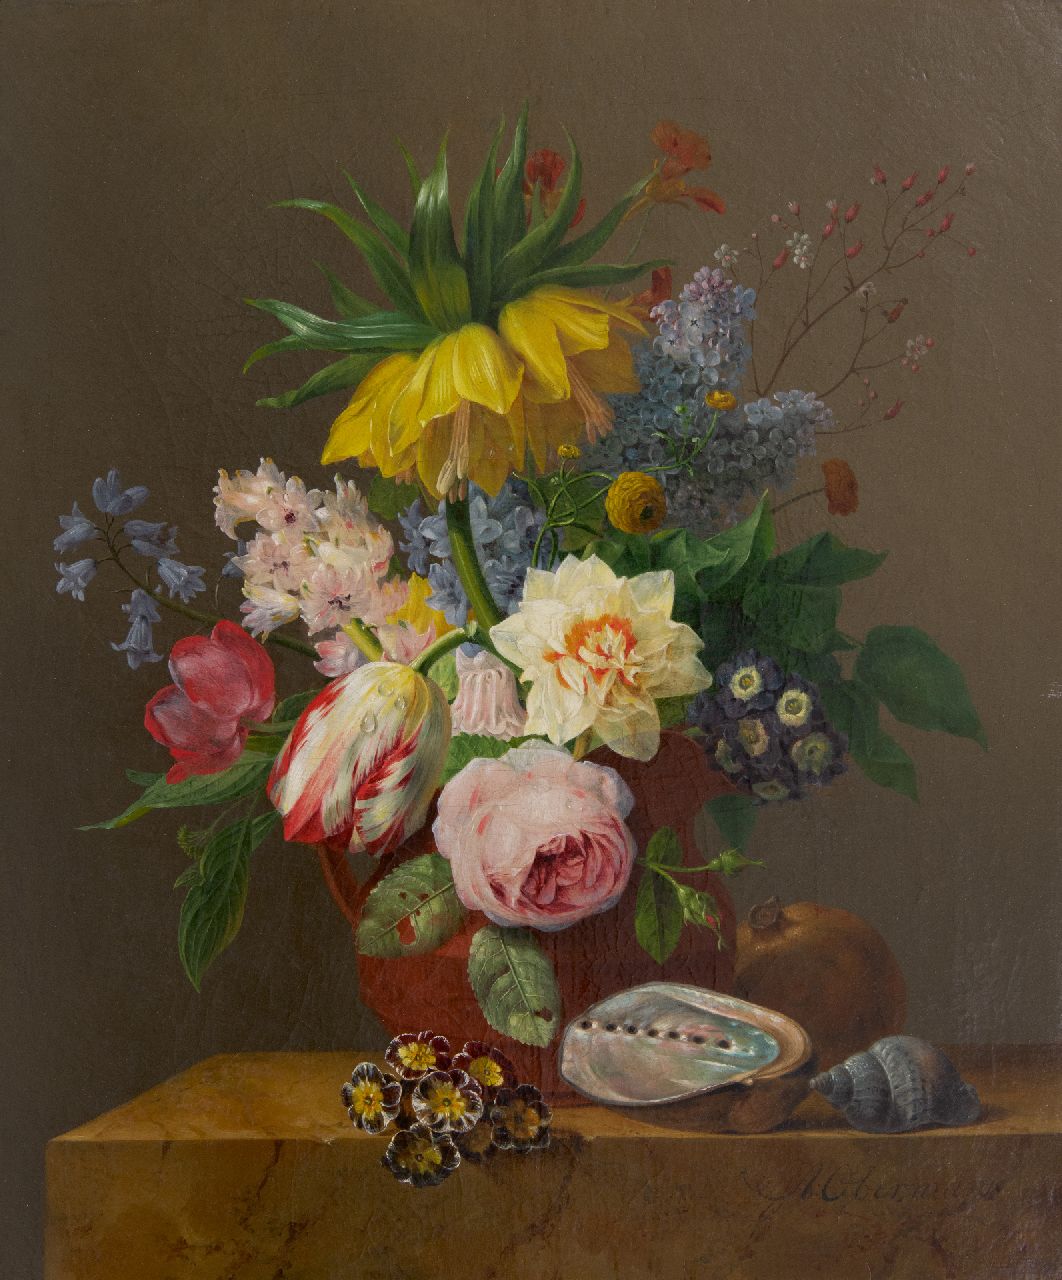 Oberman A.  | Anthony Oberman | Paintings offered for sale | A still life of flowers, a pomegranate and seashells on a marble ledge, oil on canvas 47.0 x 39.5 cm, signed l.r.